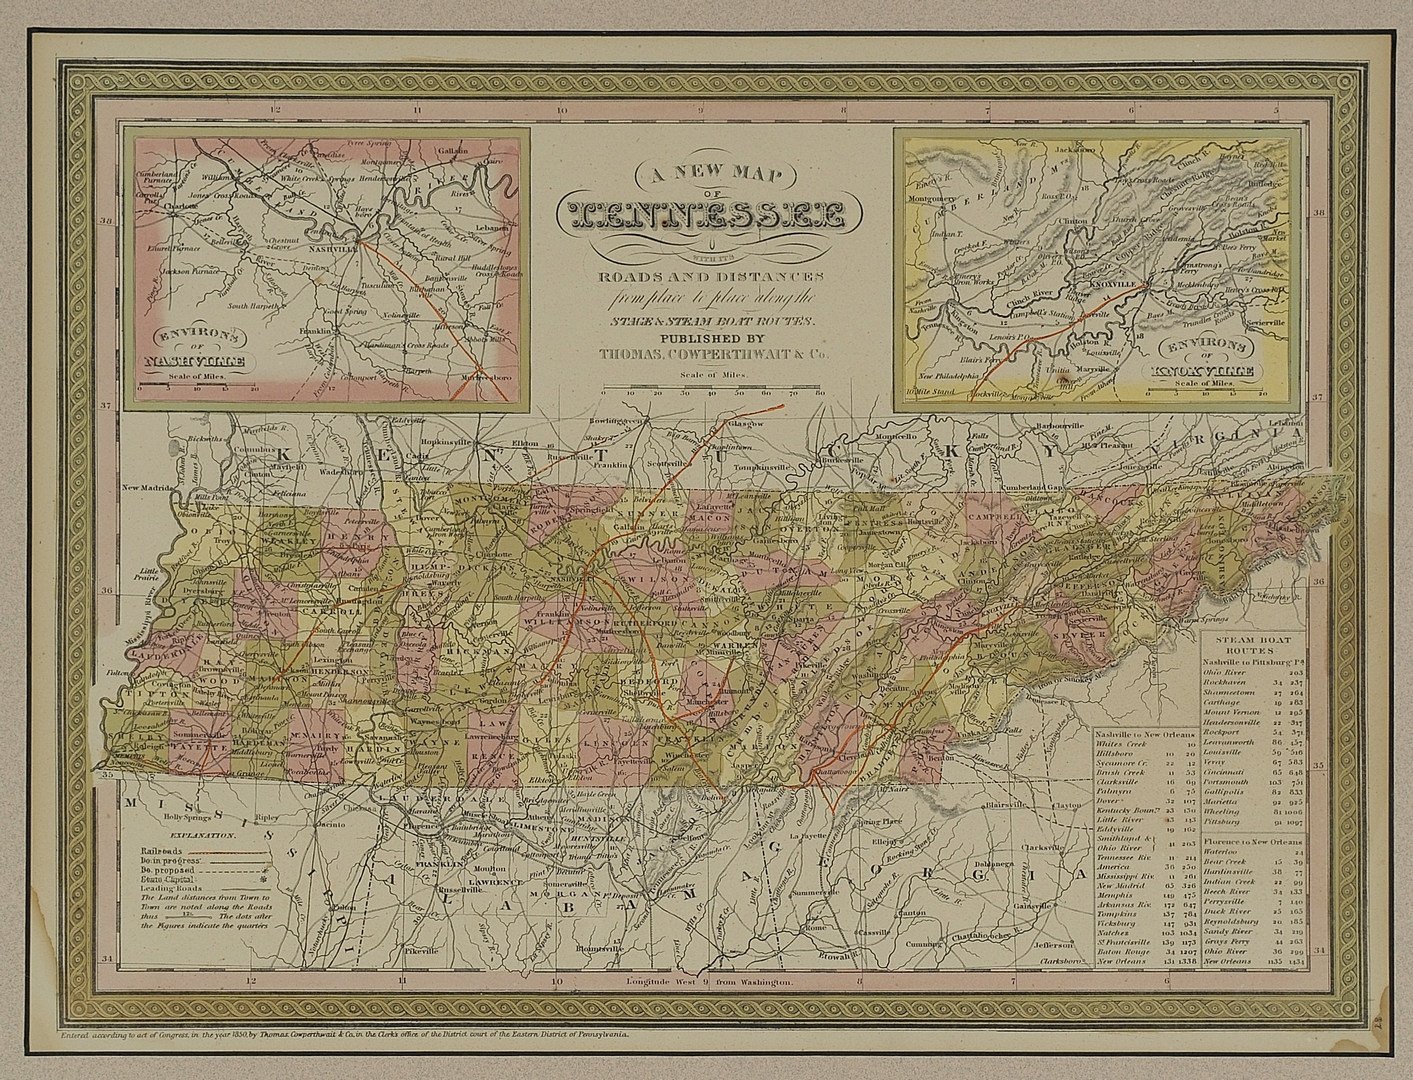 Lot 93: Two Tennessee Maps